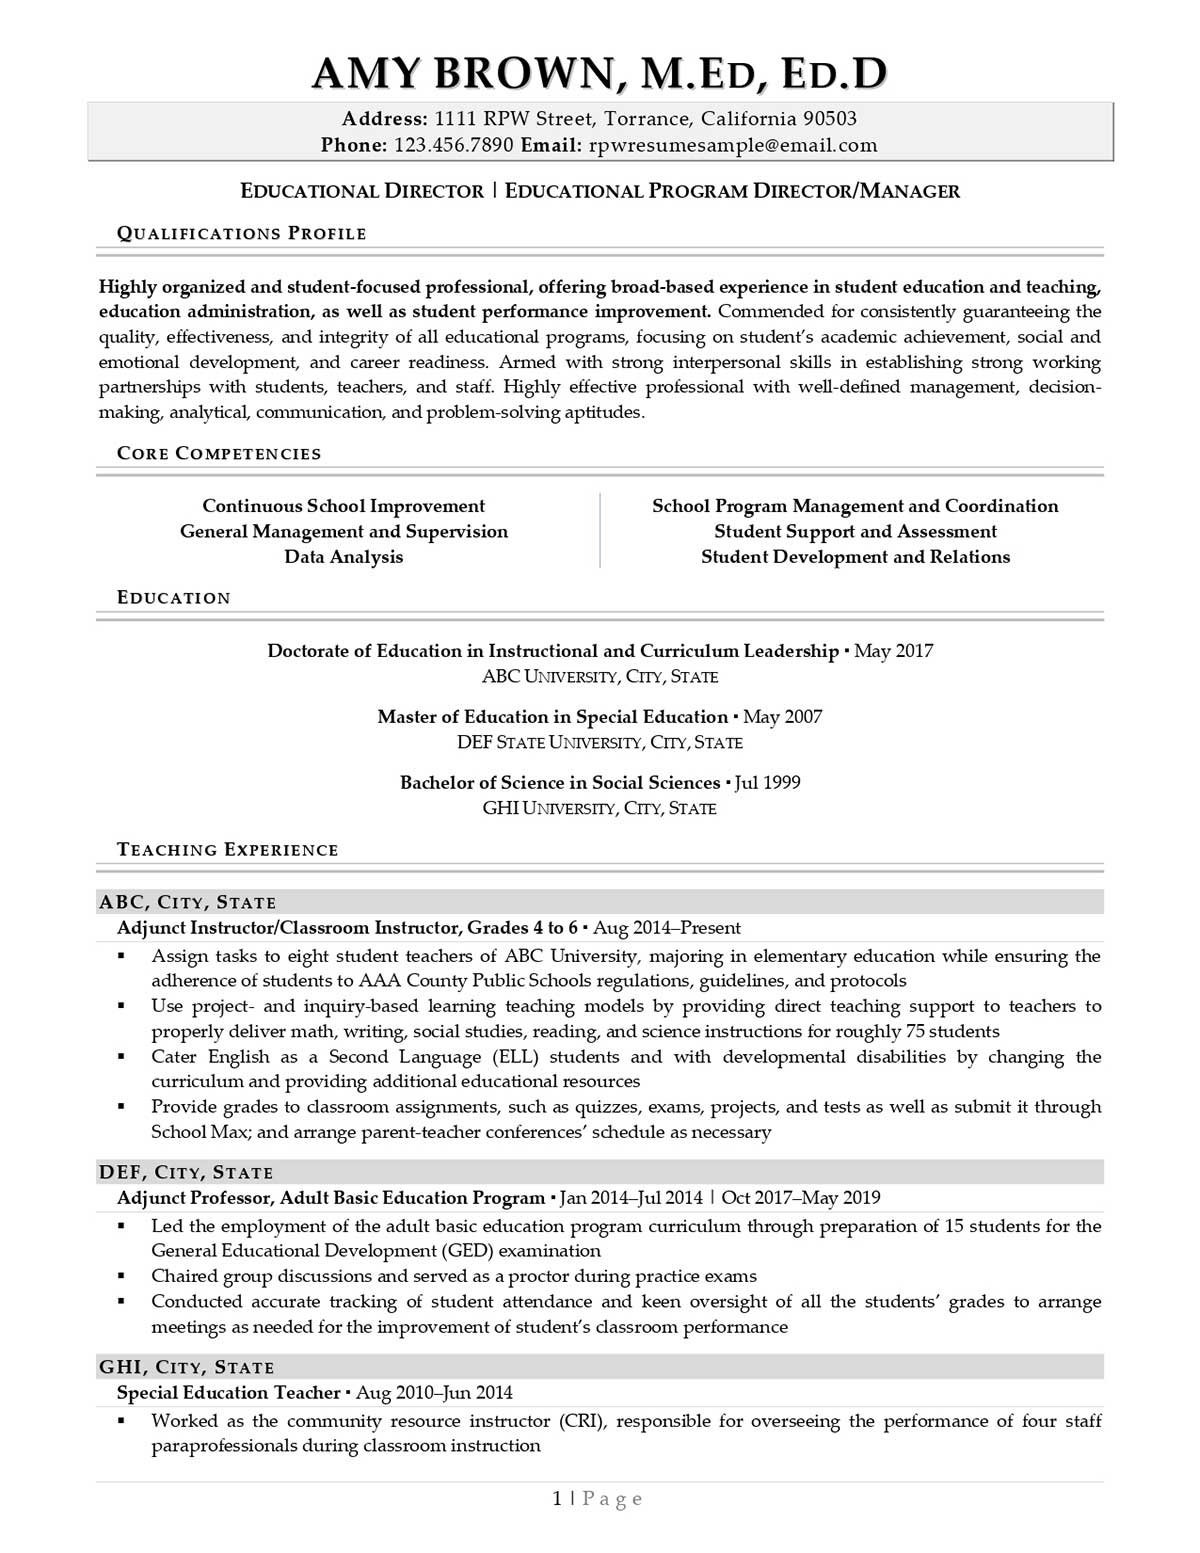 Resume Professional Writers Academic Resume Example Page One